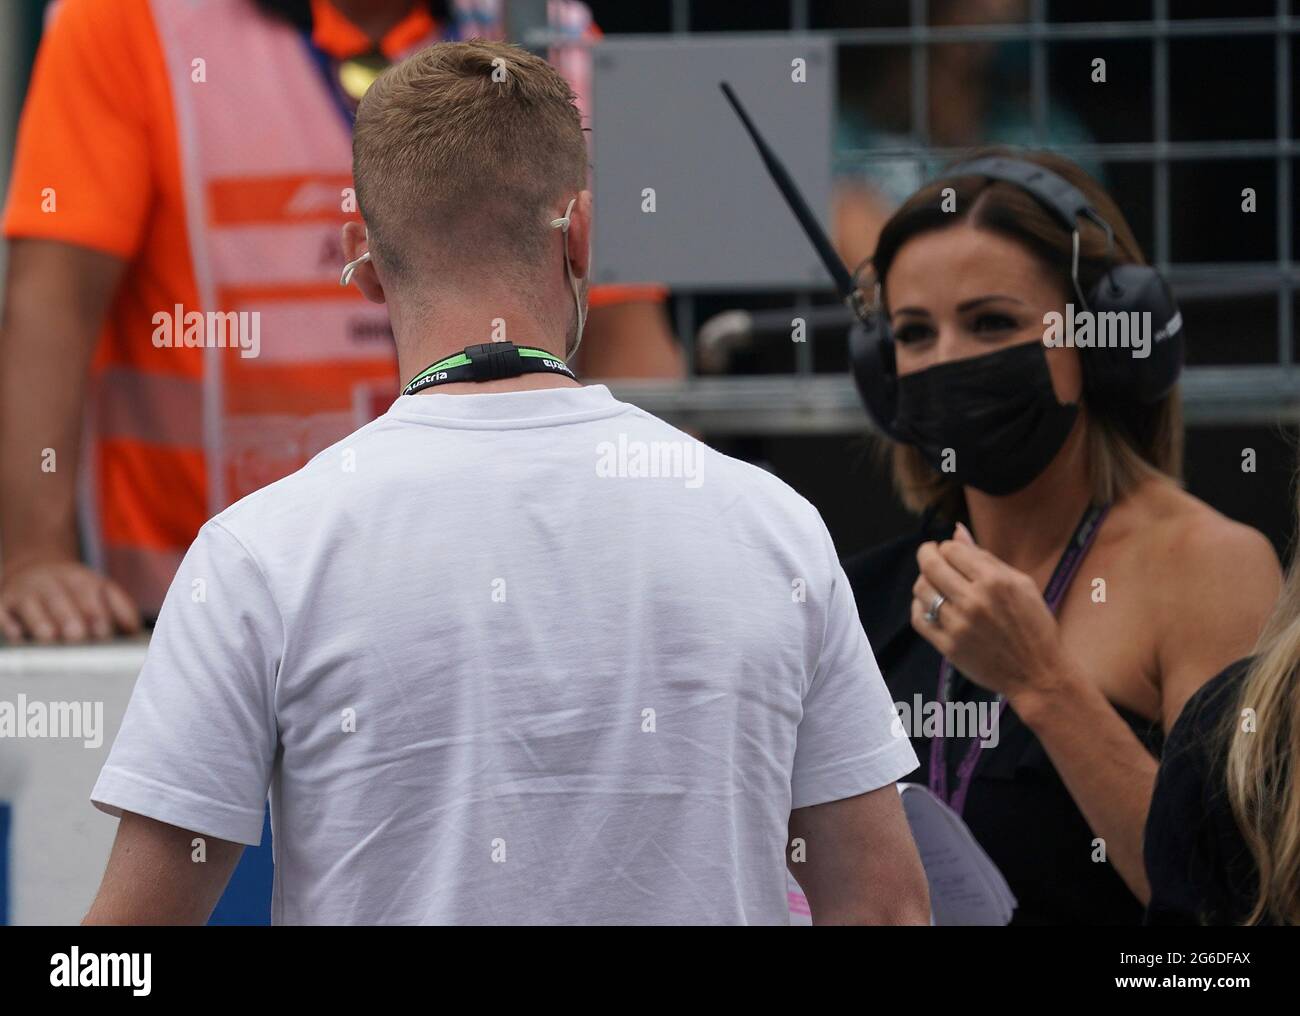 04.07.2021, Red Bull Ring, Spielberg, Formula 1 BWT Grosser Preis von  Österreich 2021, in the picture The British Formula 1 reporter Natalie  Pinkham confuses the German soccer player Timo Werner and makes